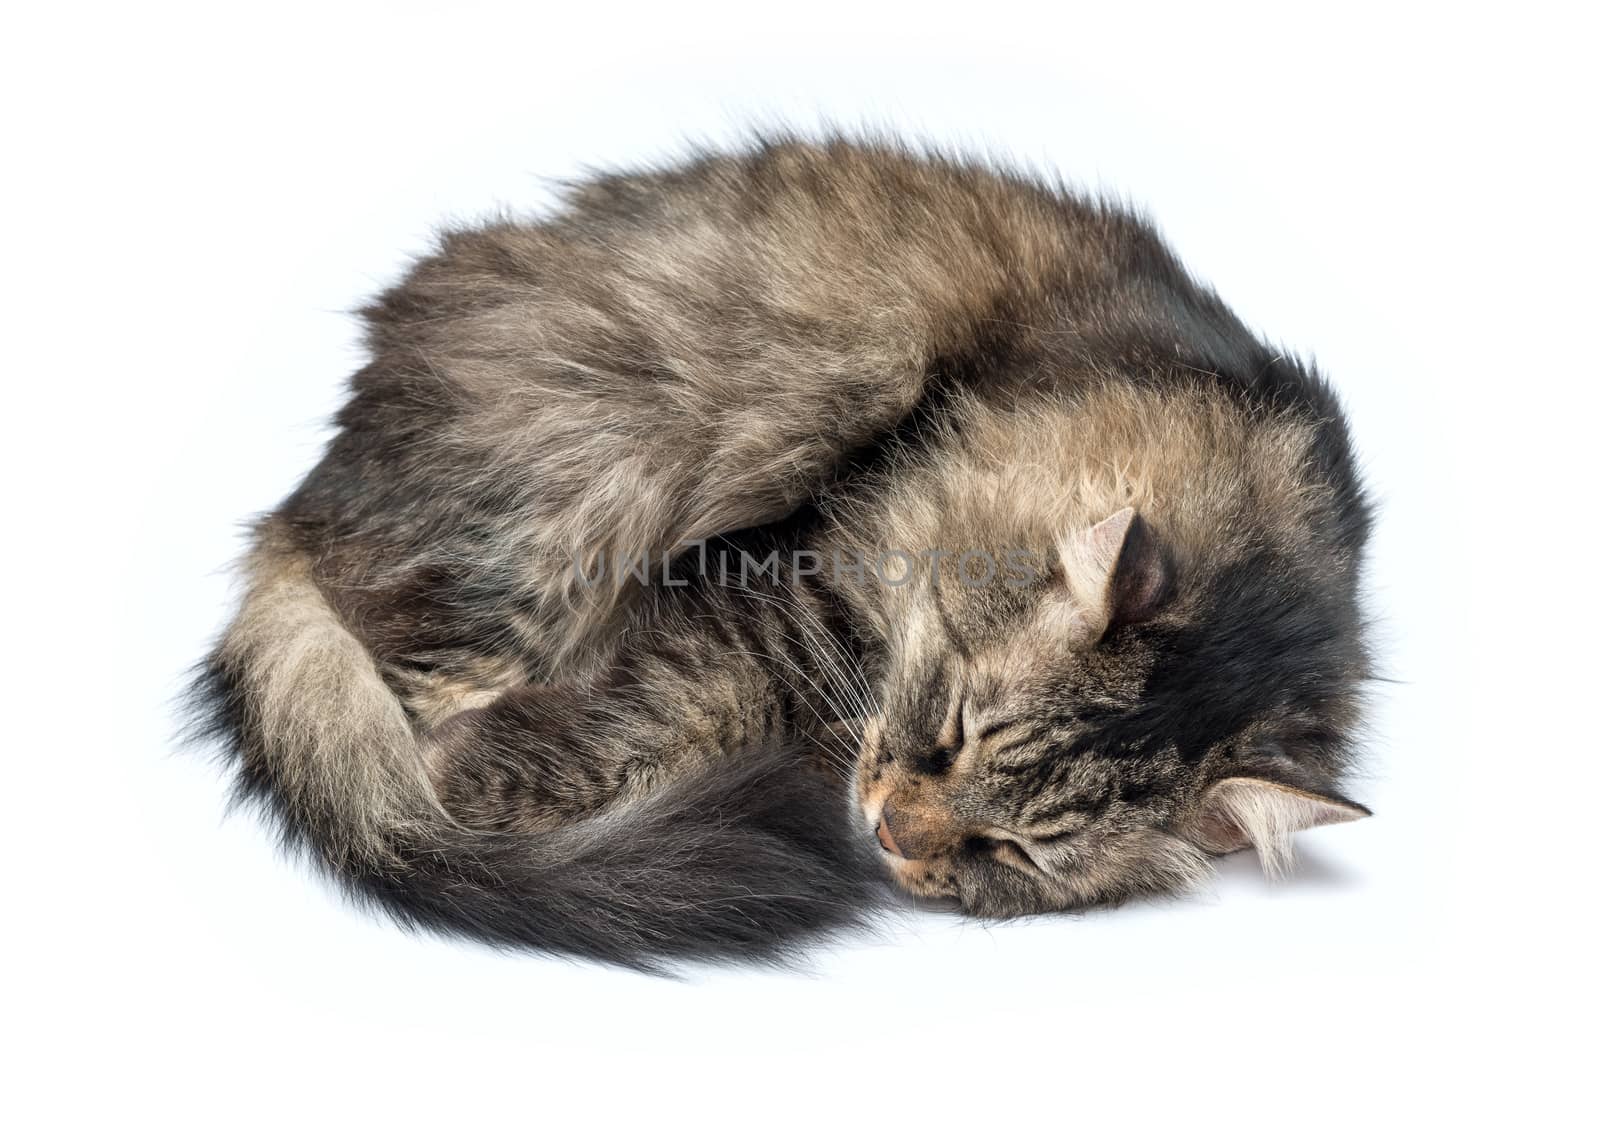 A Sleeping Cat Isolated on a White Background by DNKSTUDIO